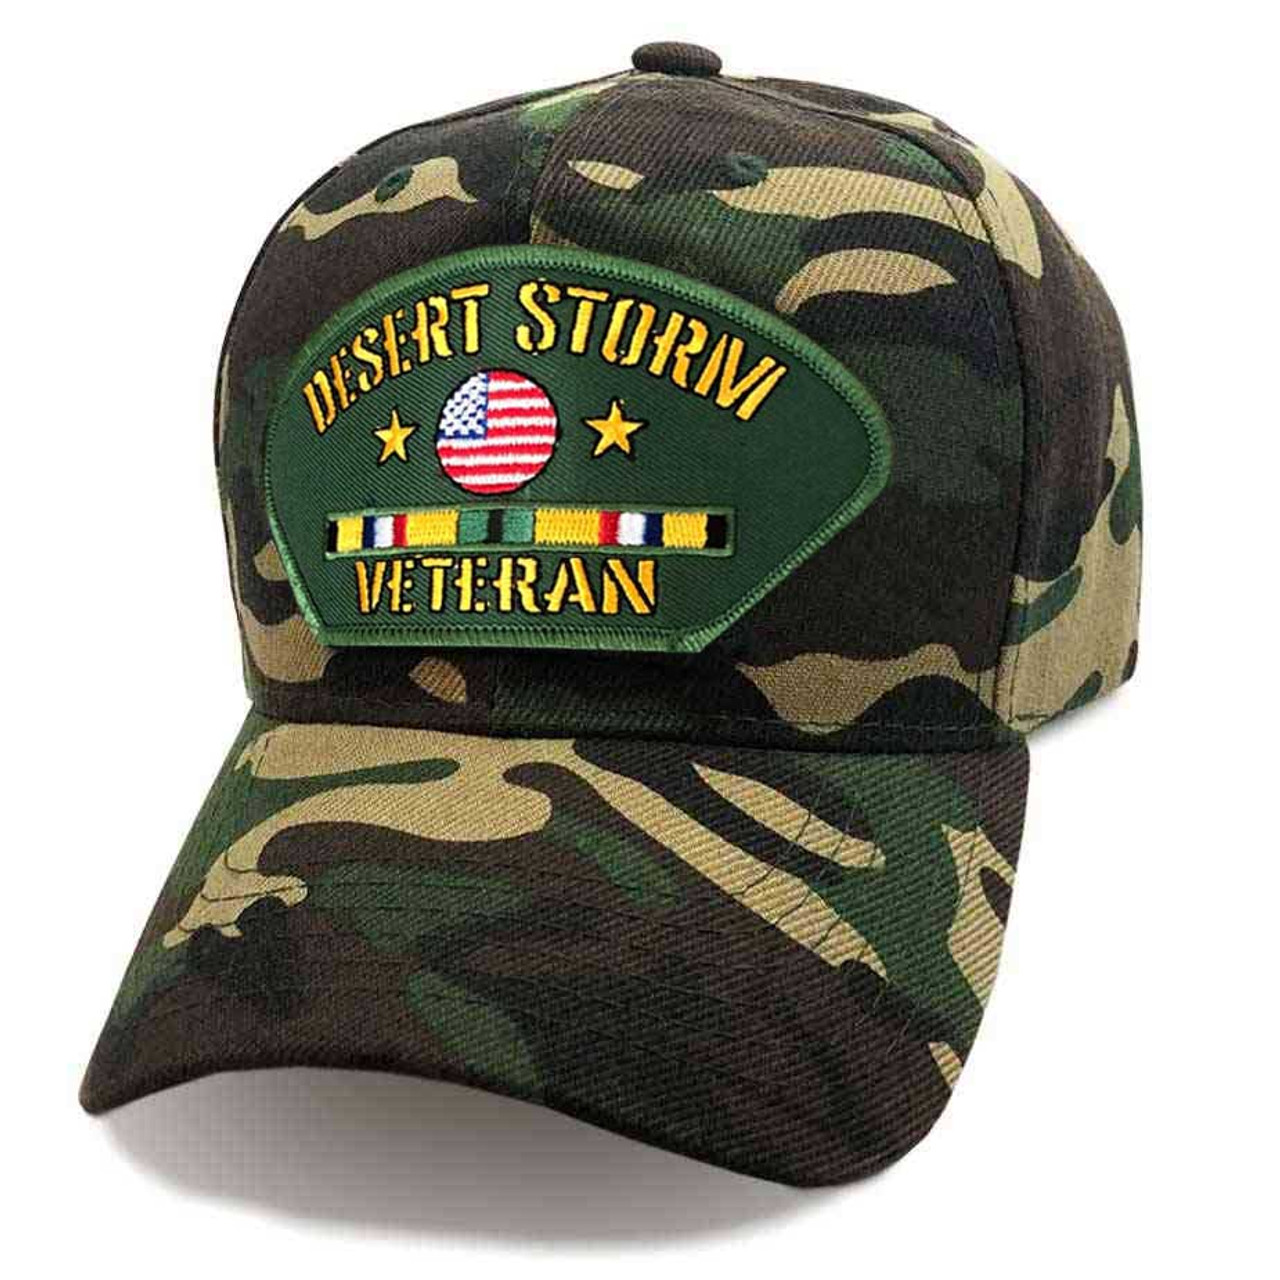 Desert Storm Veteran Hat with Ribbons and US Flag Graphics